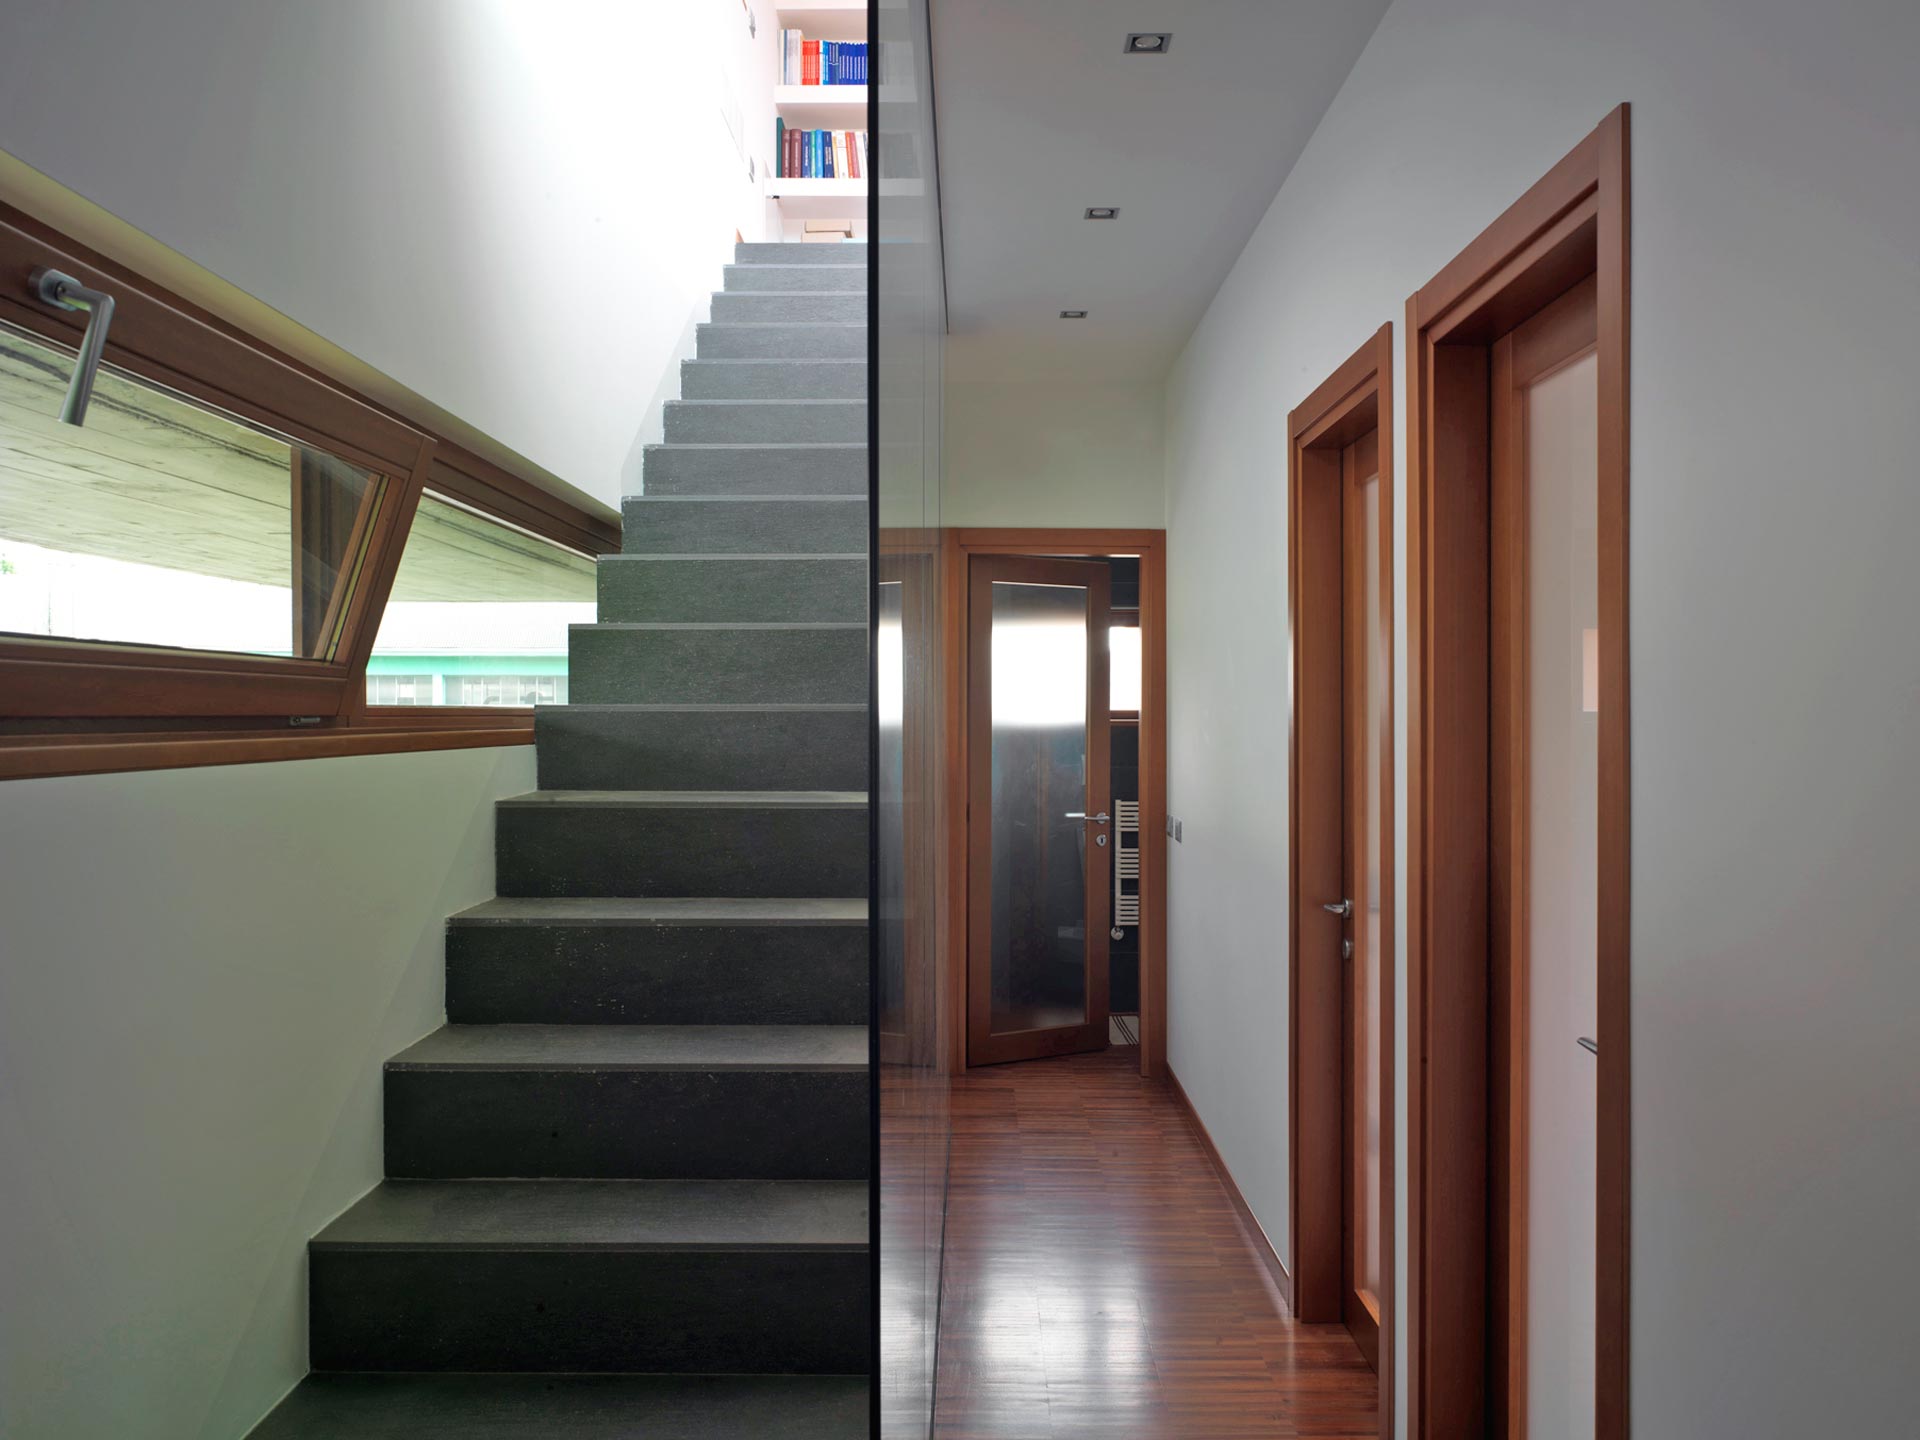 View of a corridor and a staircase with ribbon bottom hung windows